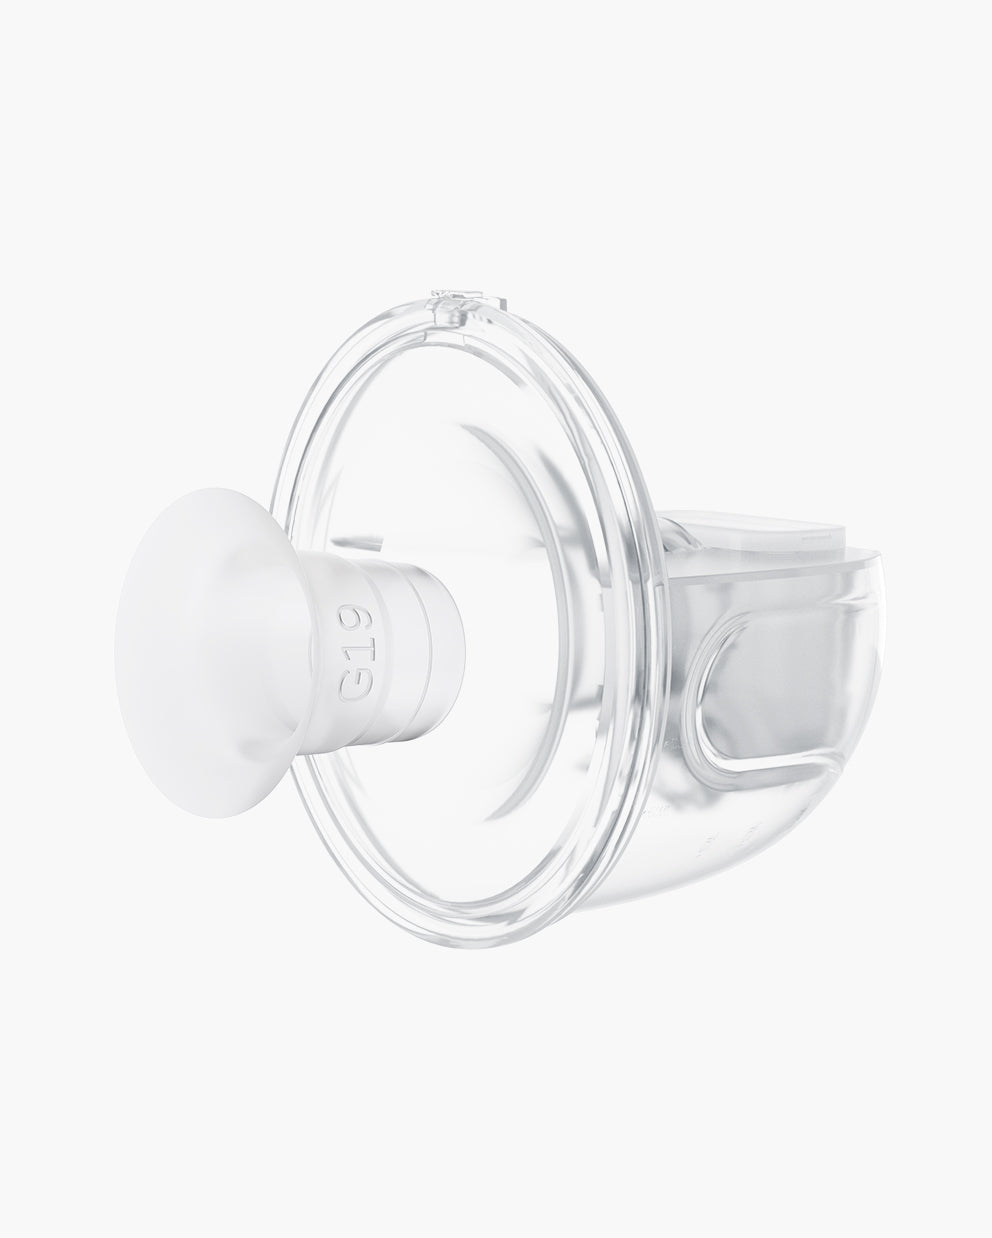 M1 Flange Insert Breast Pumps Replacement